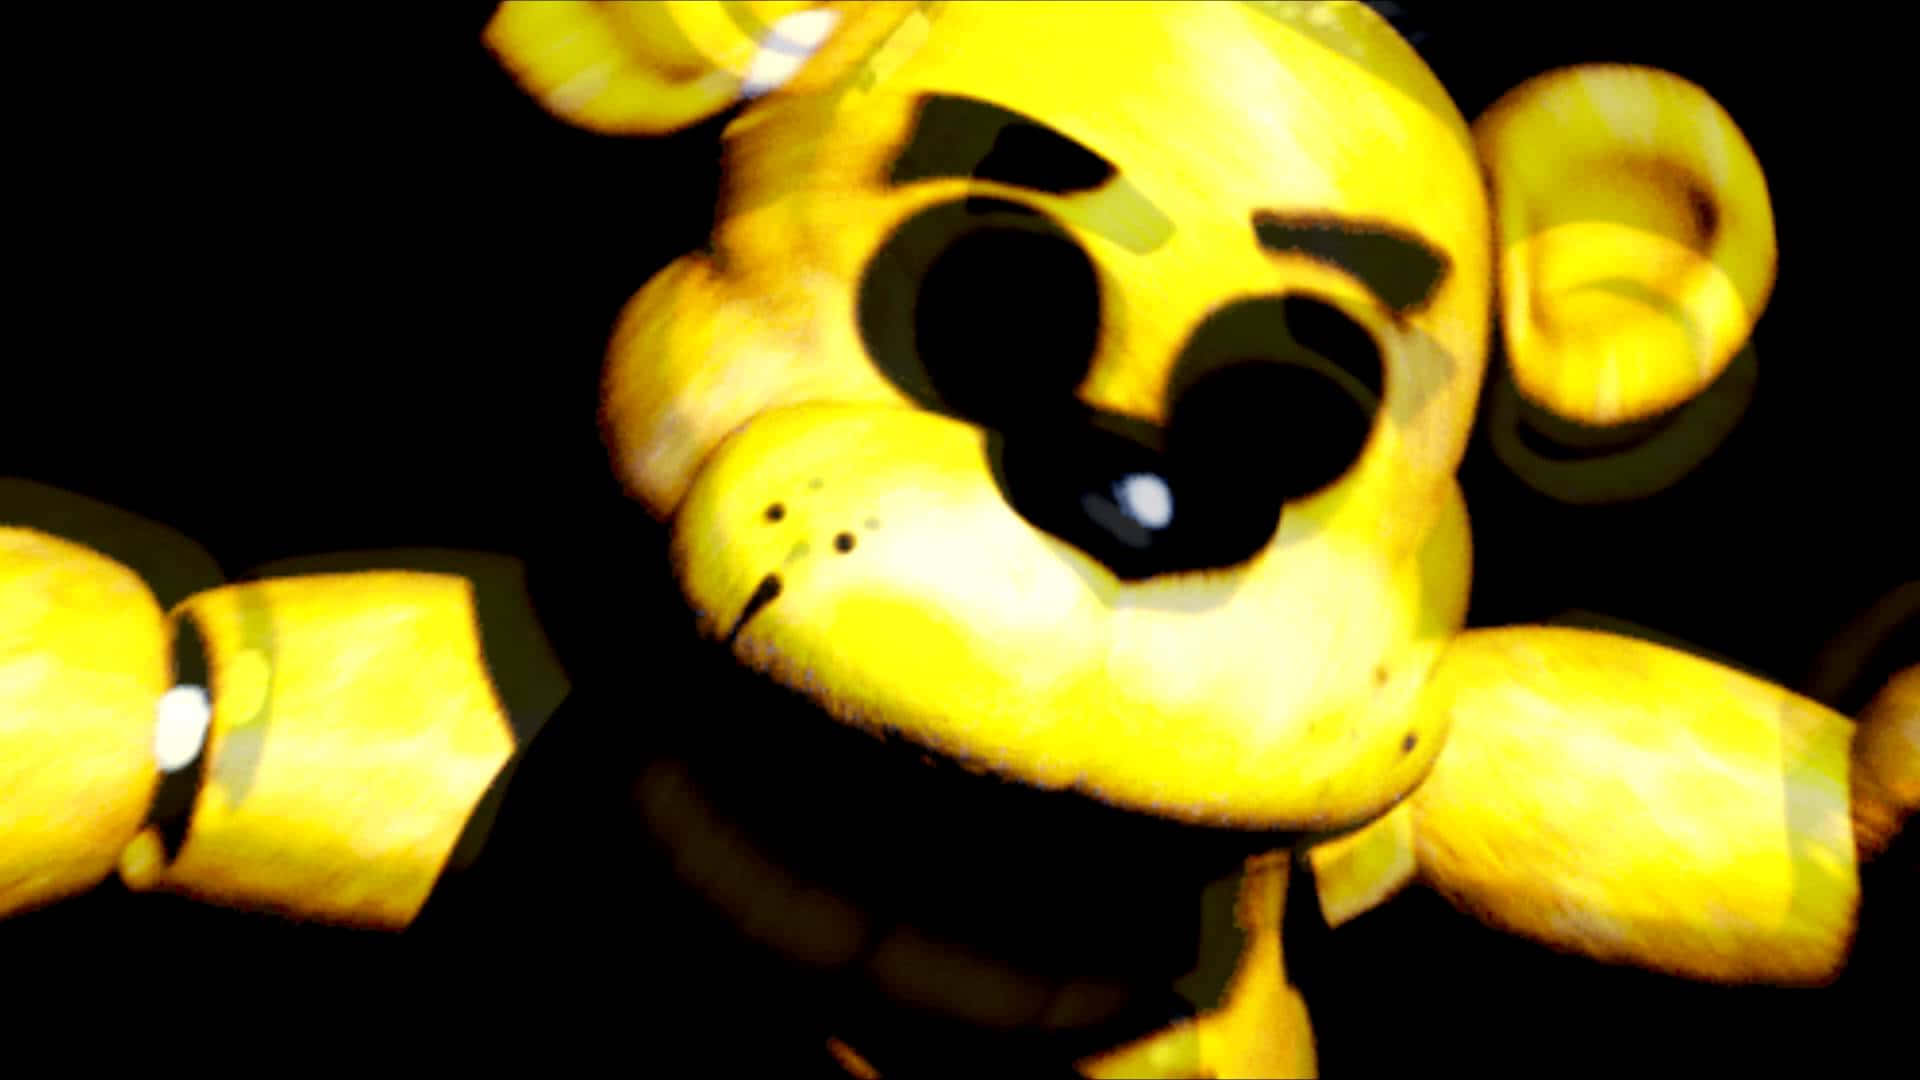 Mysterious Golden Freddy posing in the shadows Wallpaper